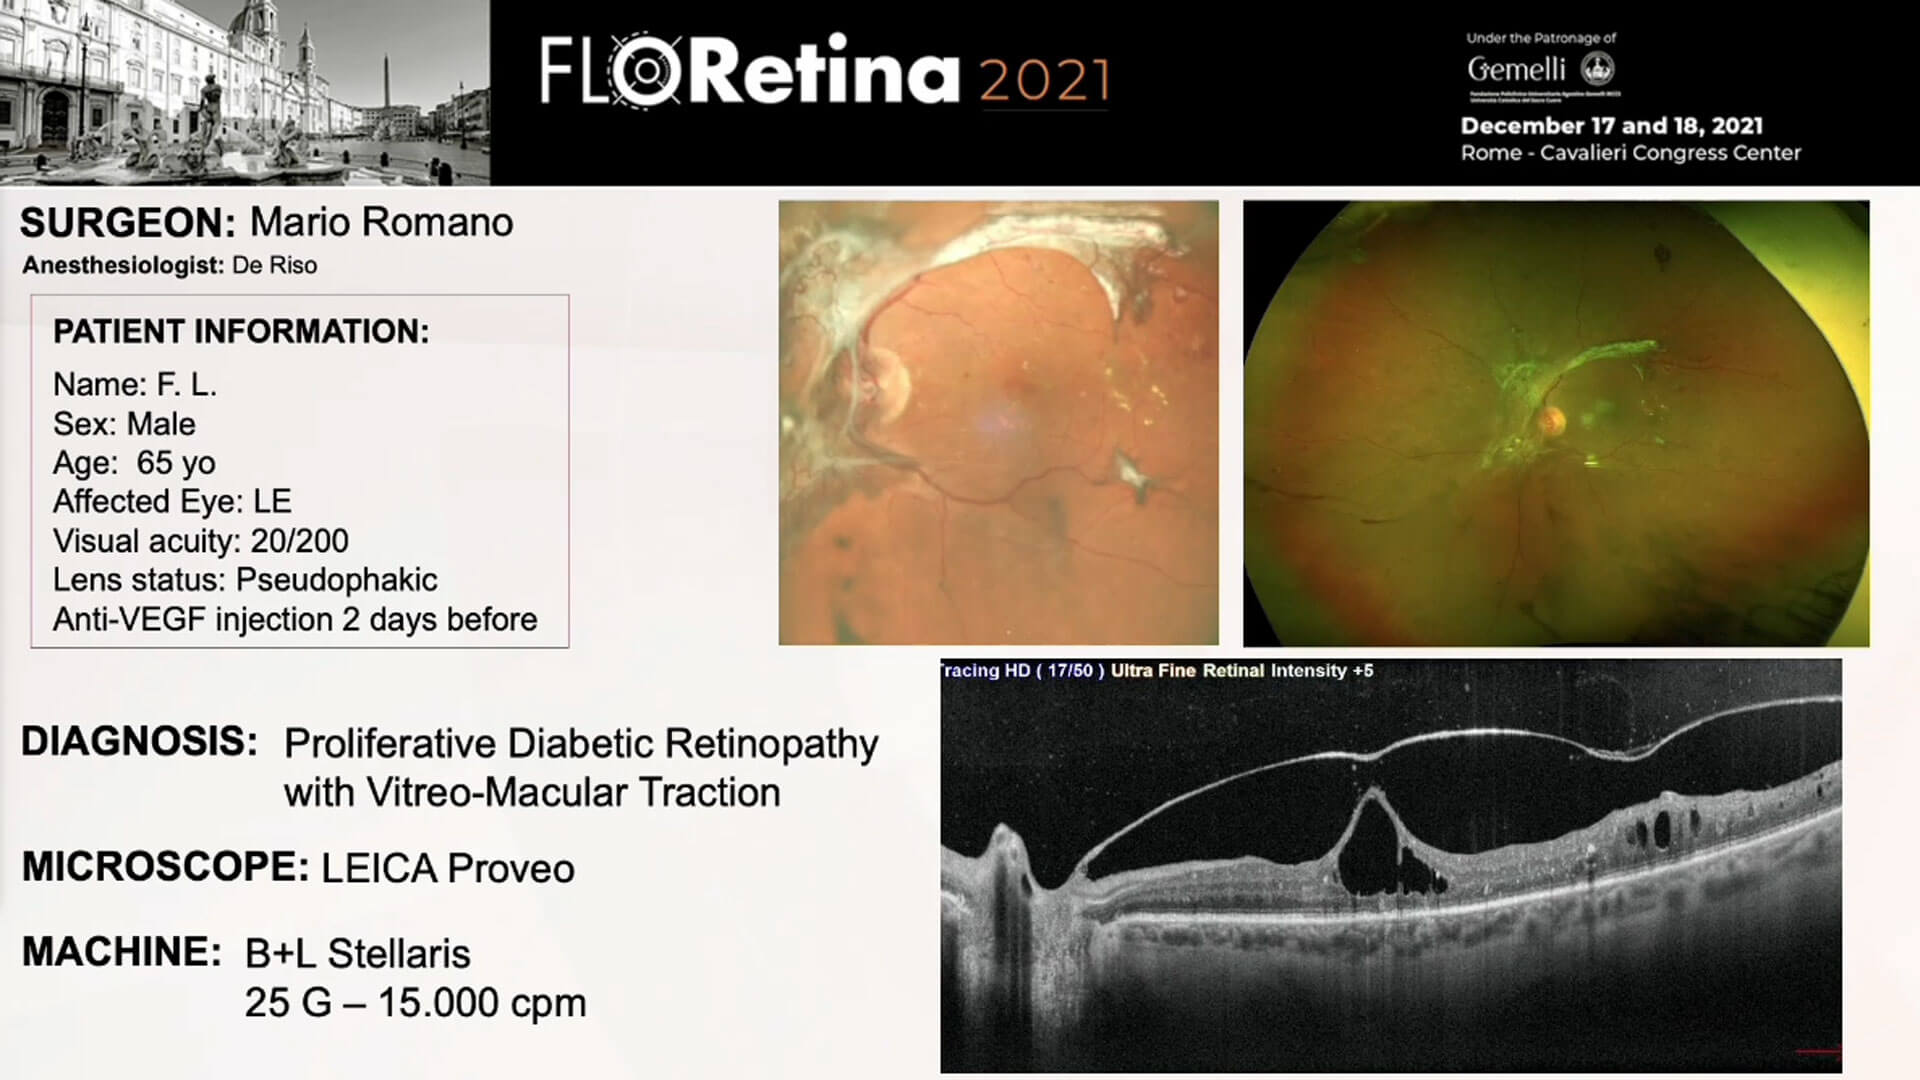 Proliferative Diabetic Retinopathy with Vitreo-Macular Traction